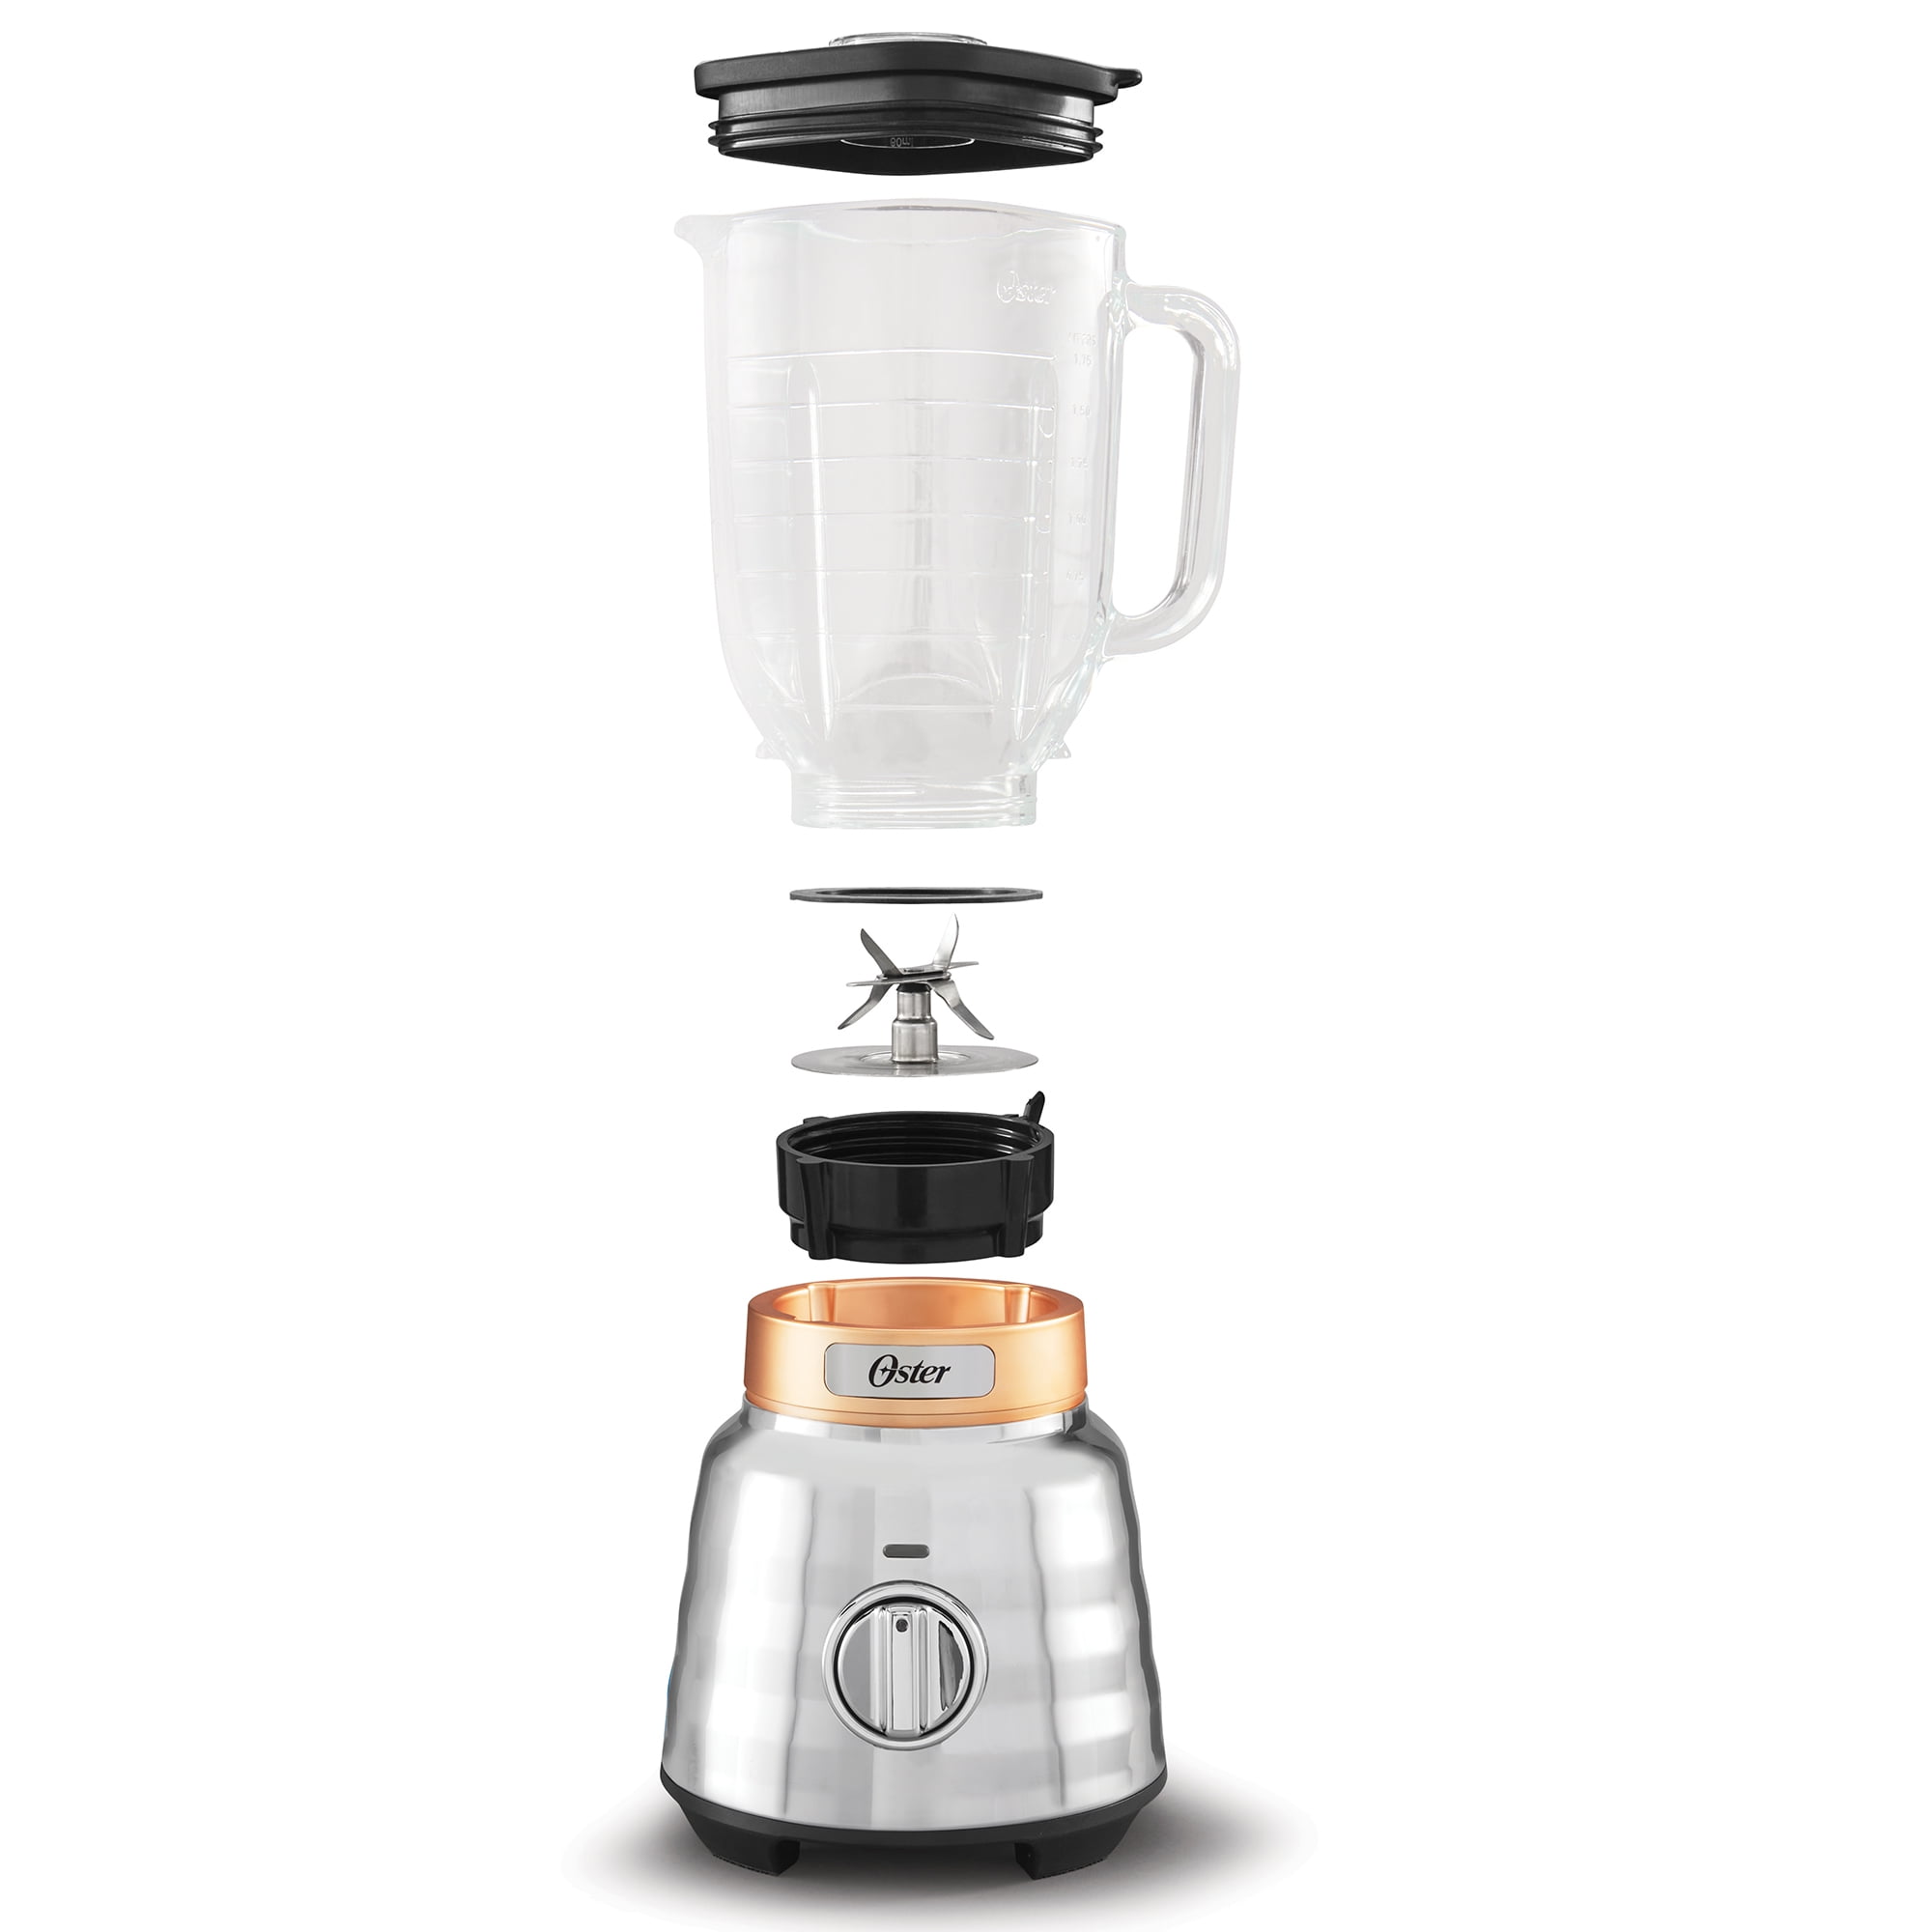 Oster Beehive Blender with 1100-Watt Motor in Silver and Copper -